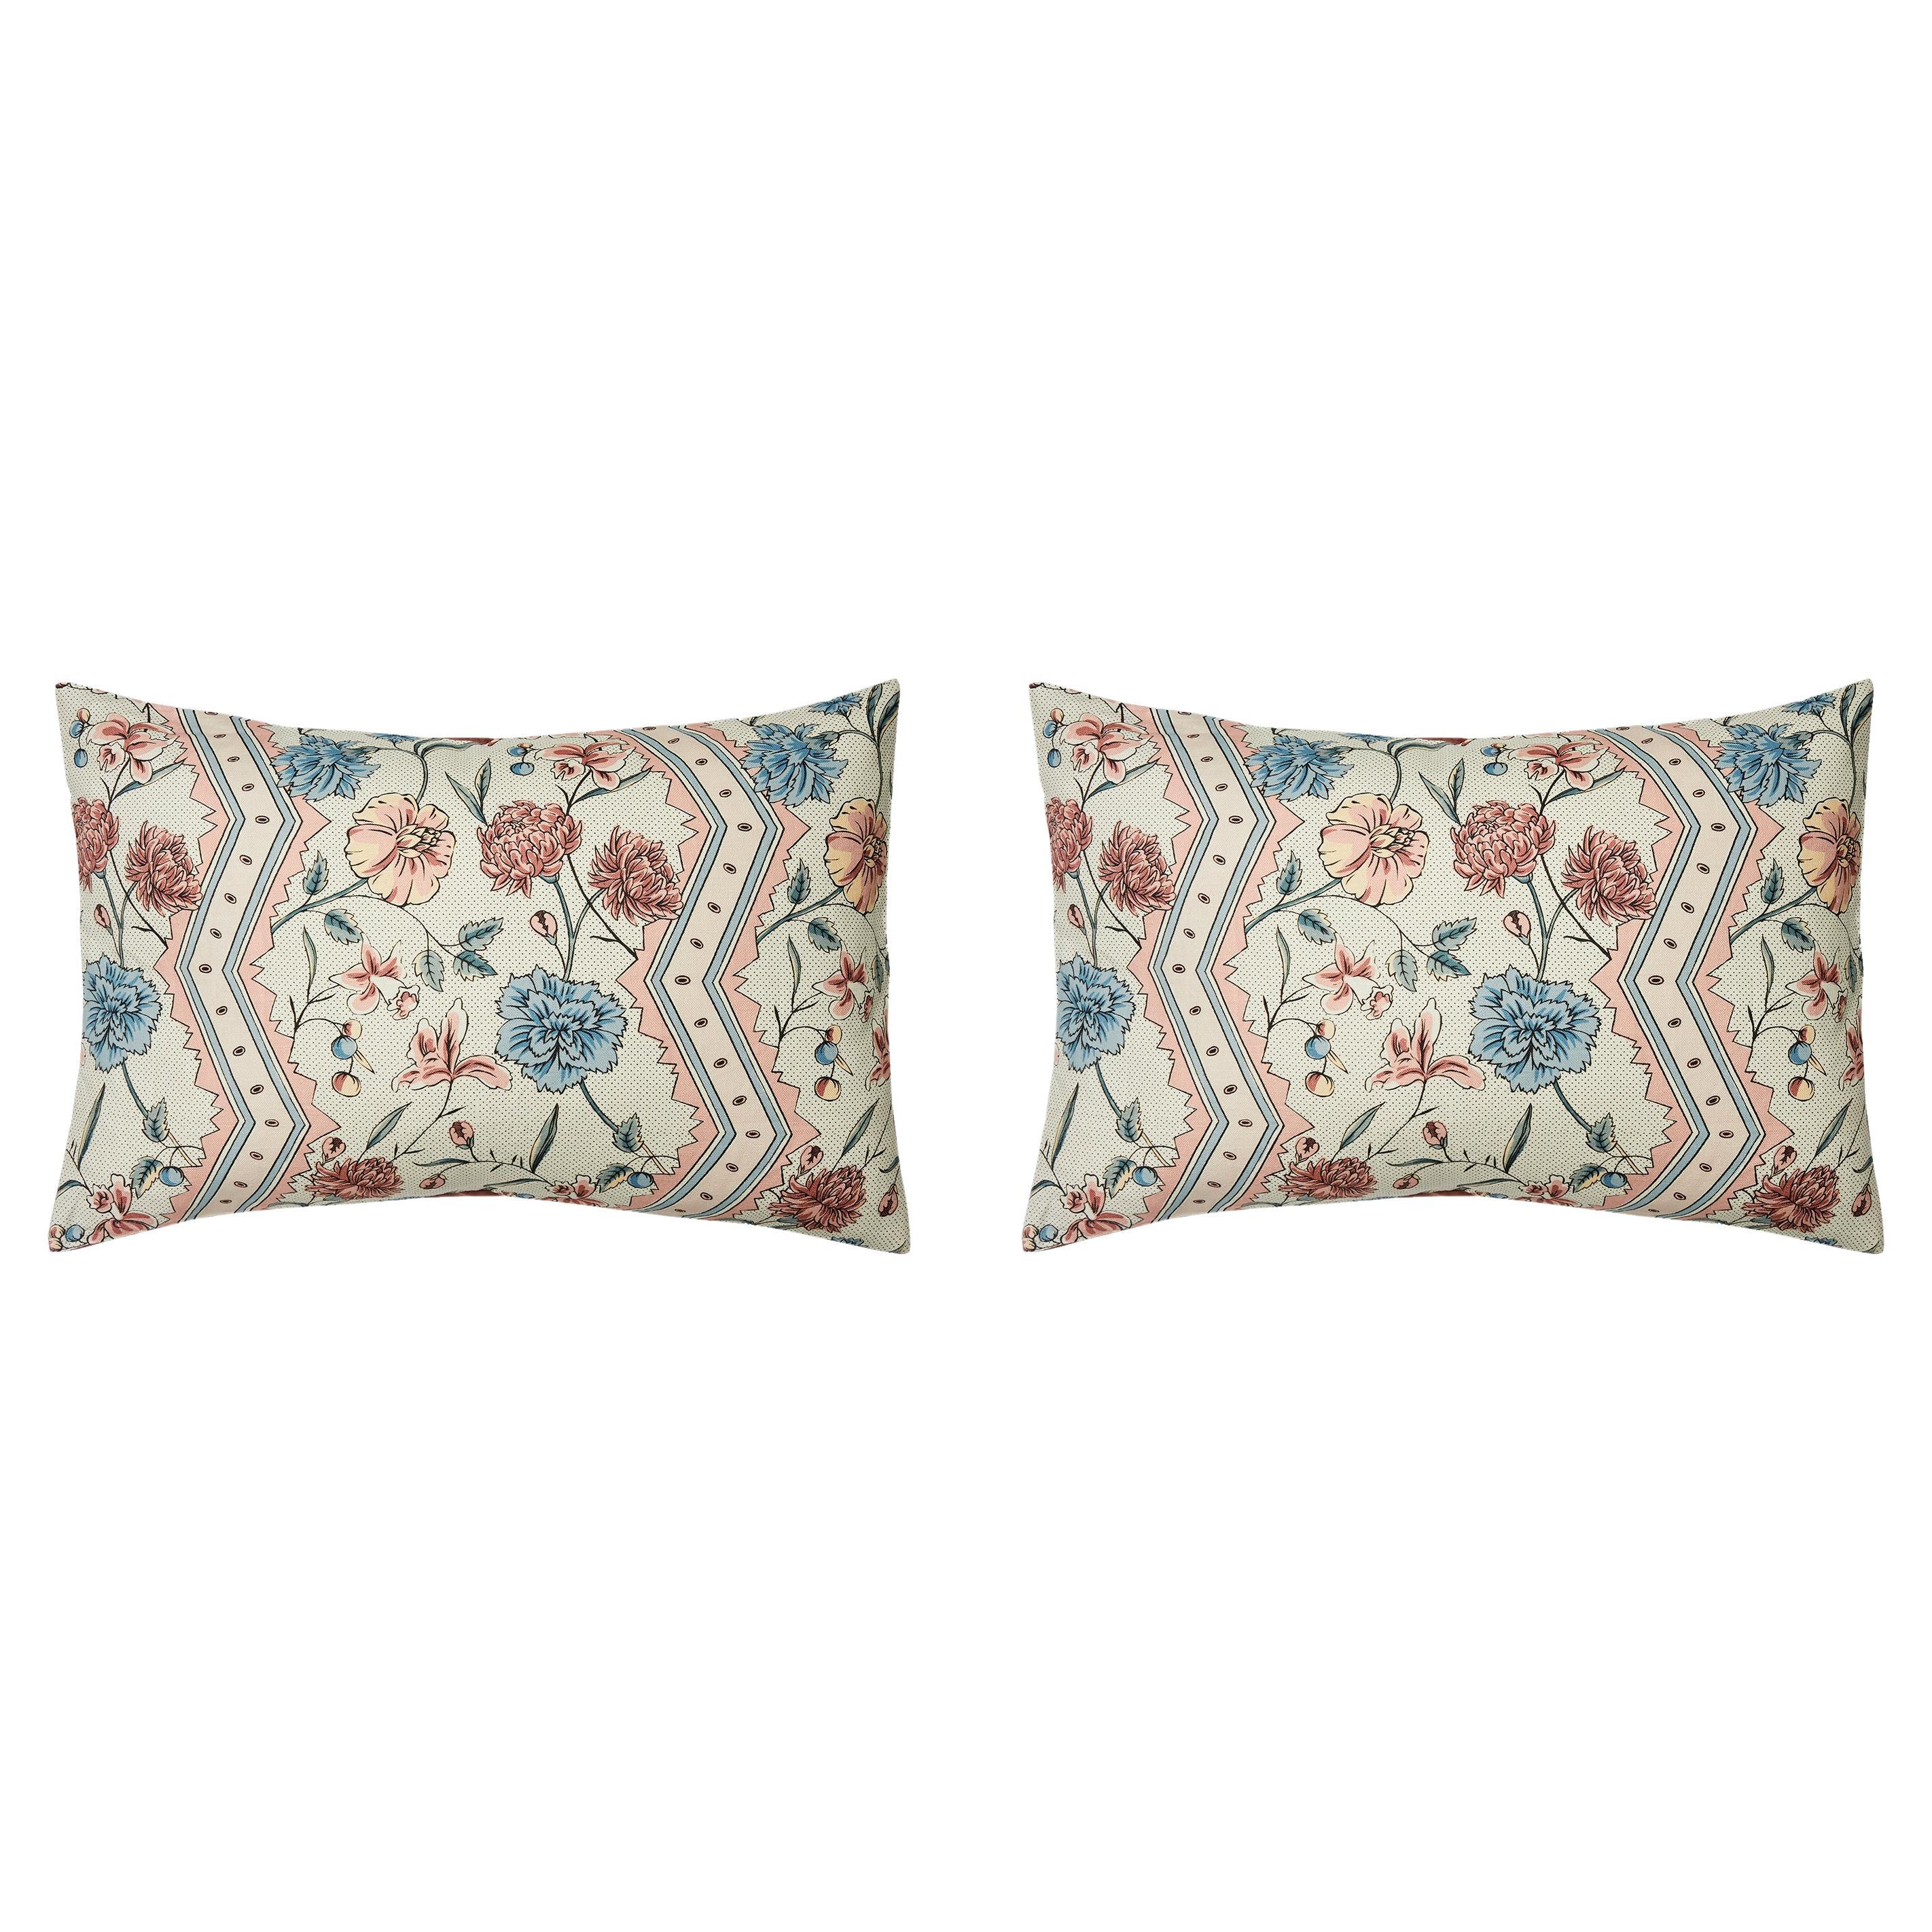 Pair of Linen Pillow Cushions - Marcel Pattern - Designed and Made in Paris